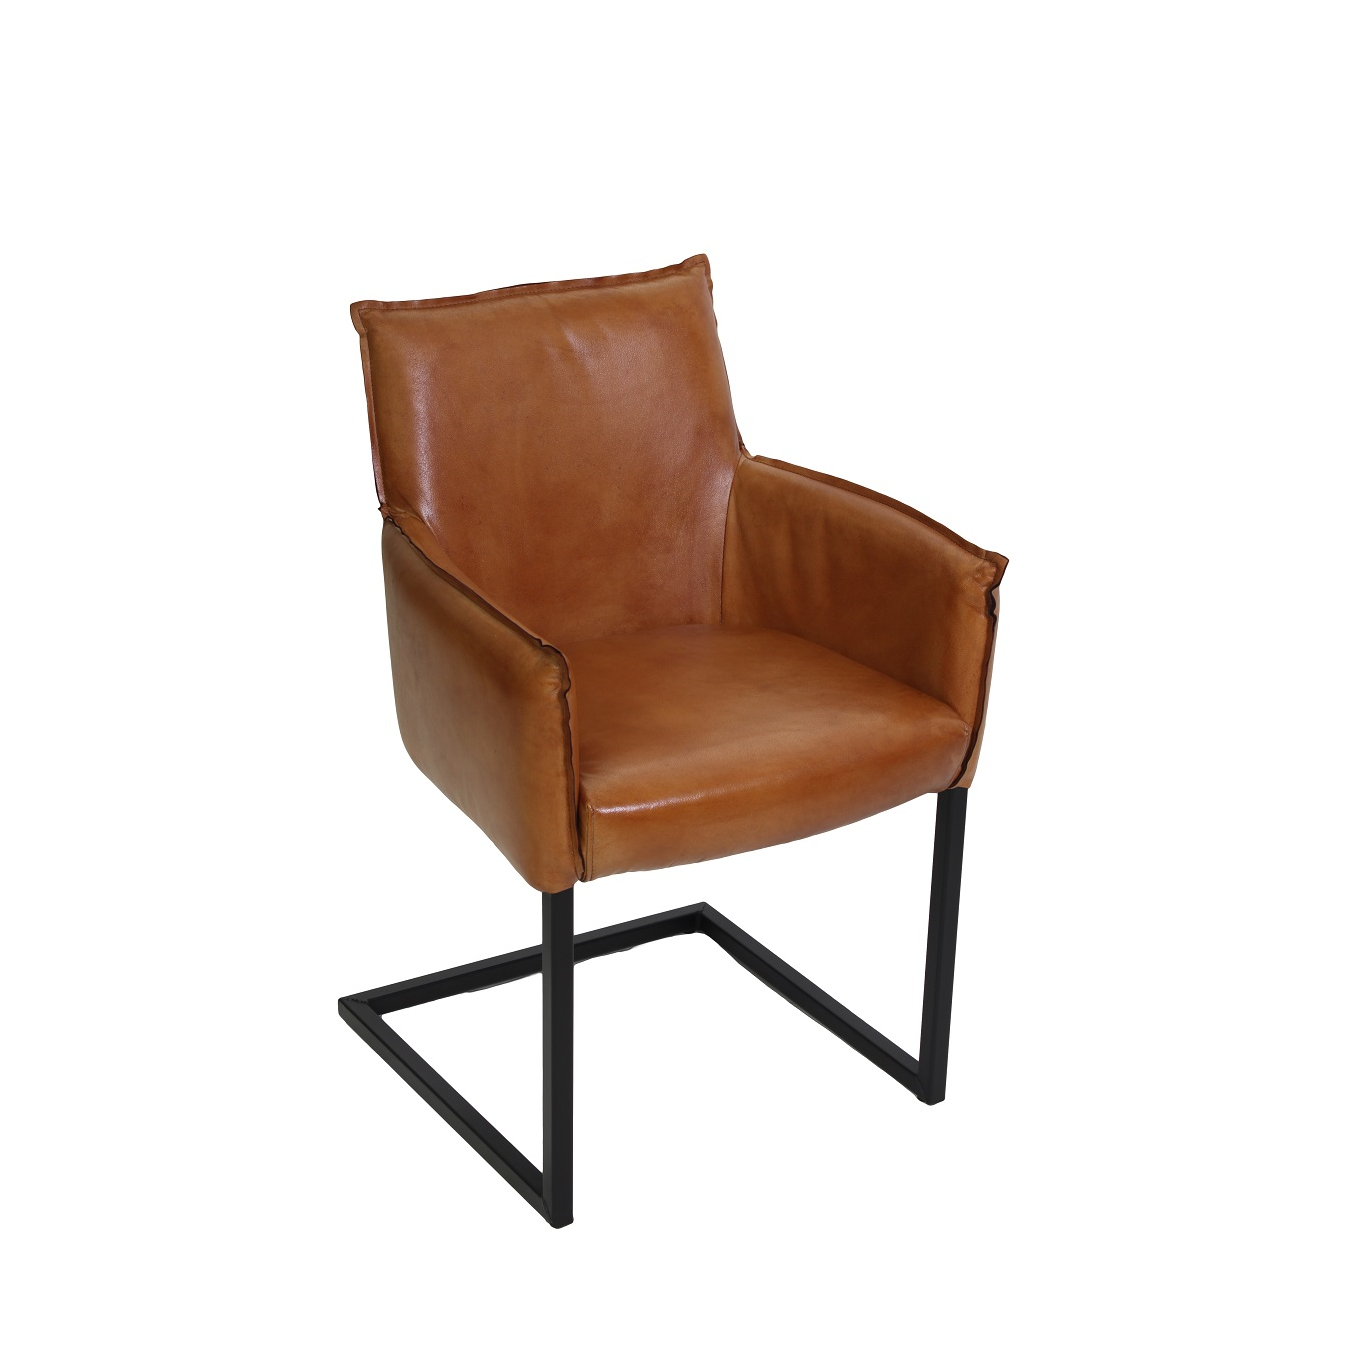 LIZA dining chair made of buffalo leather